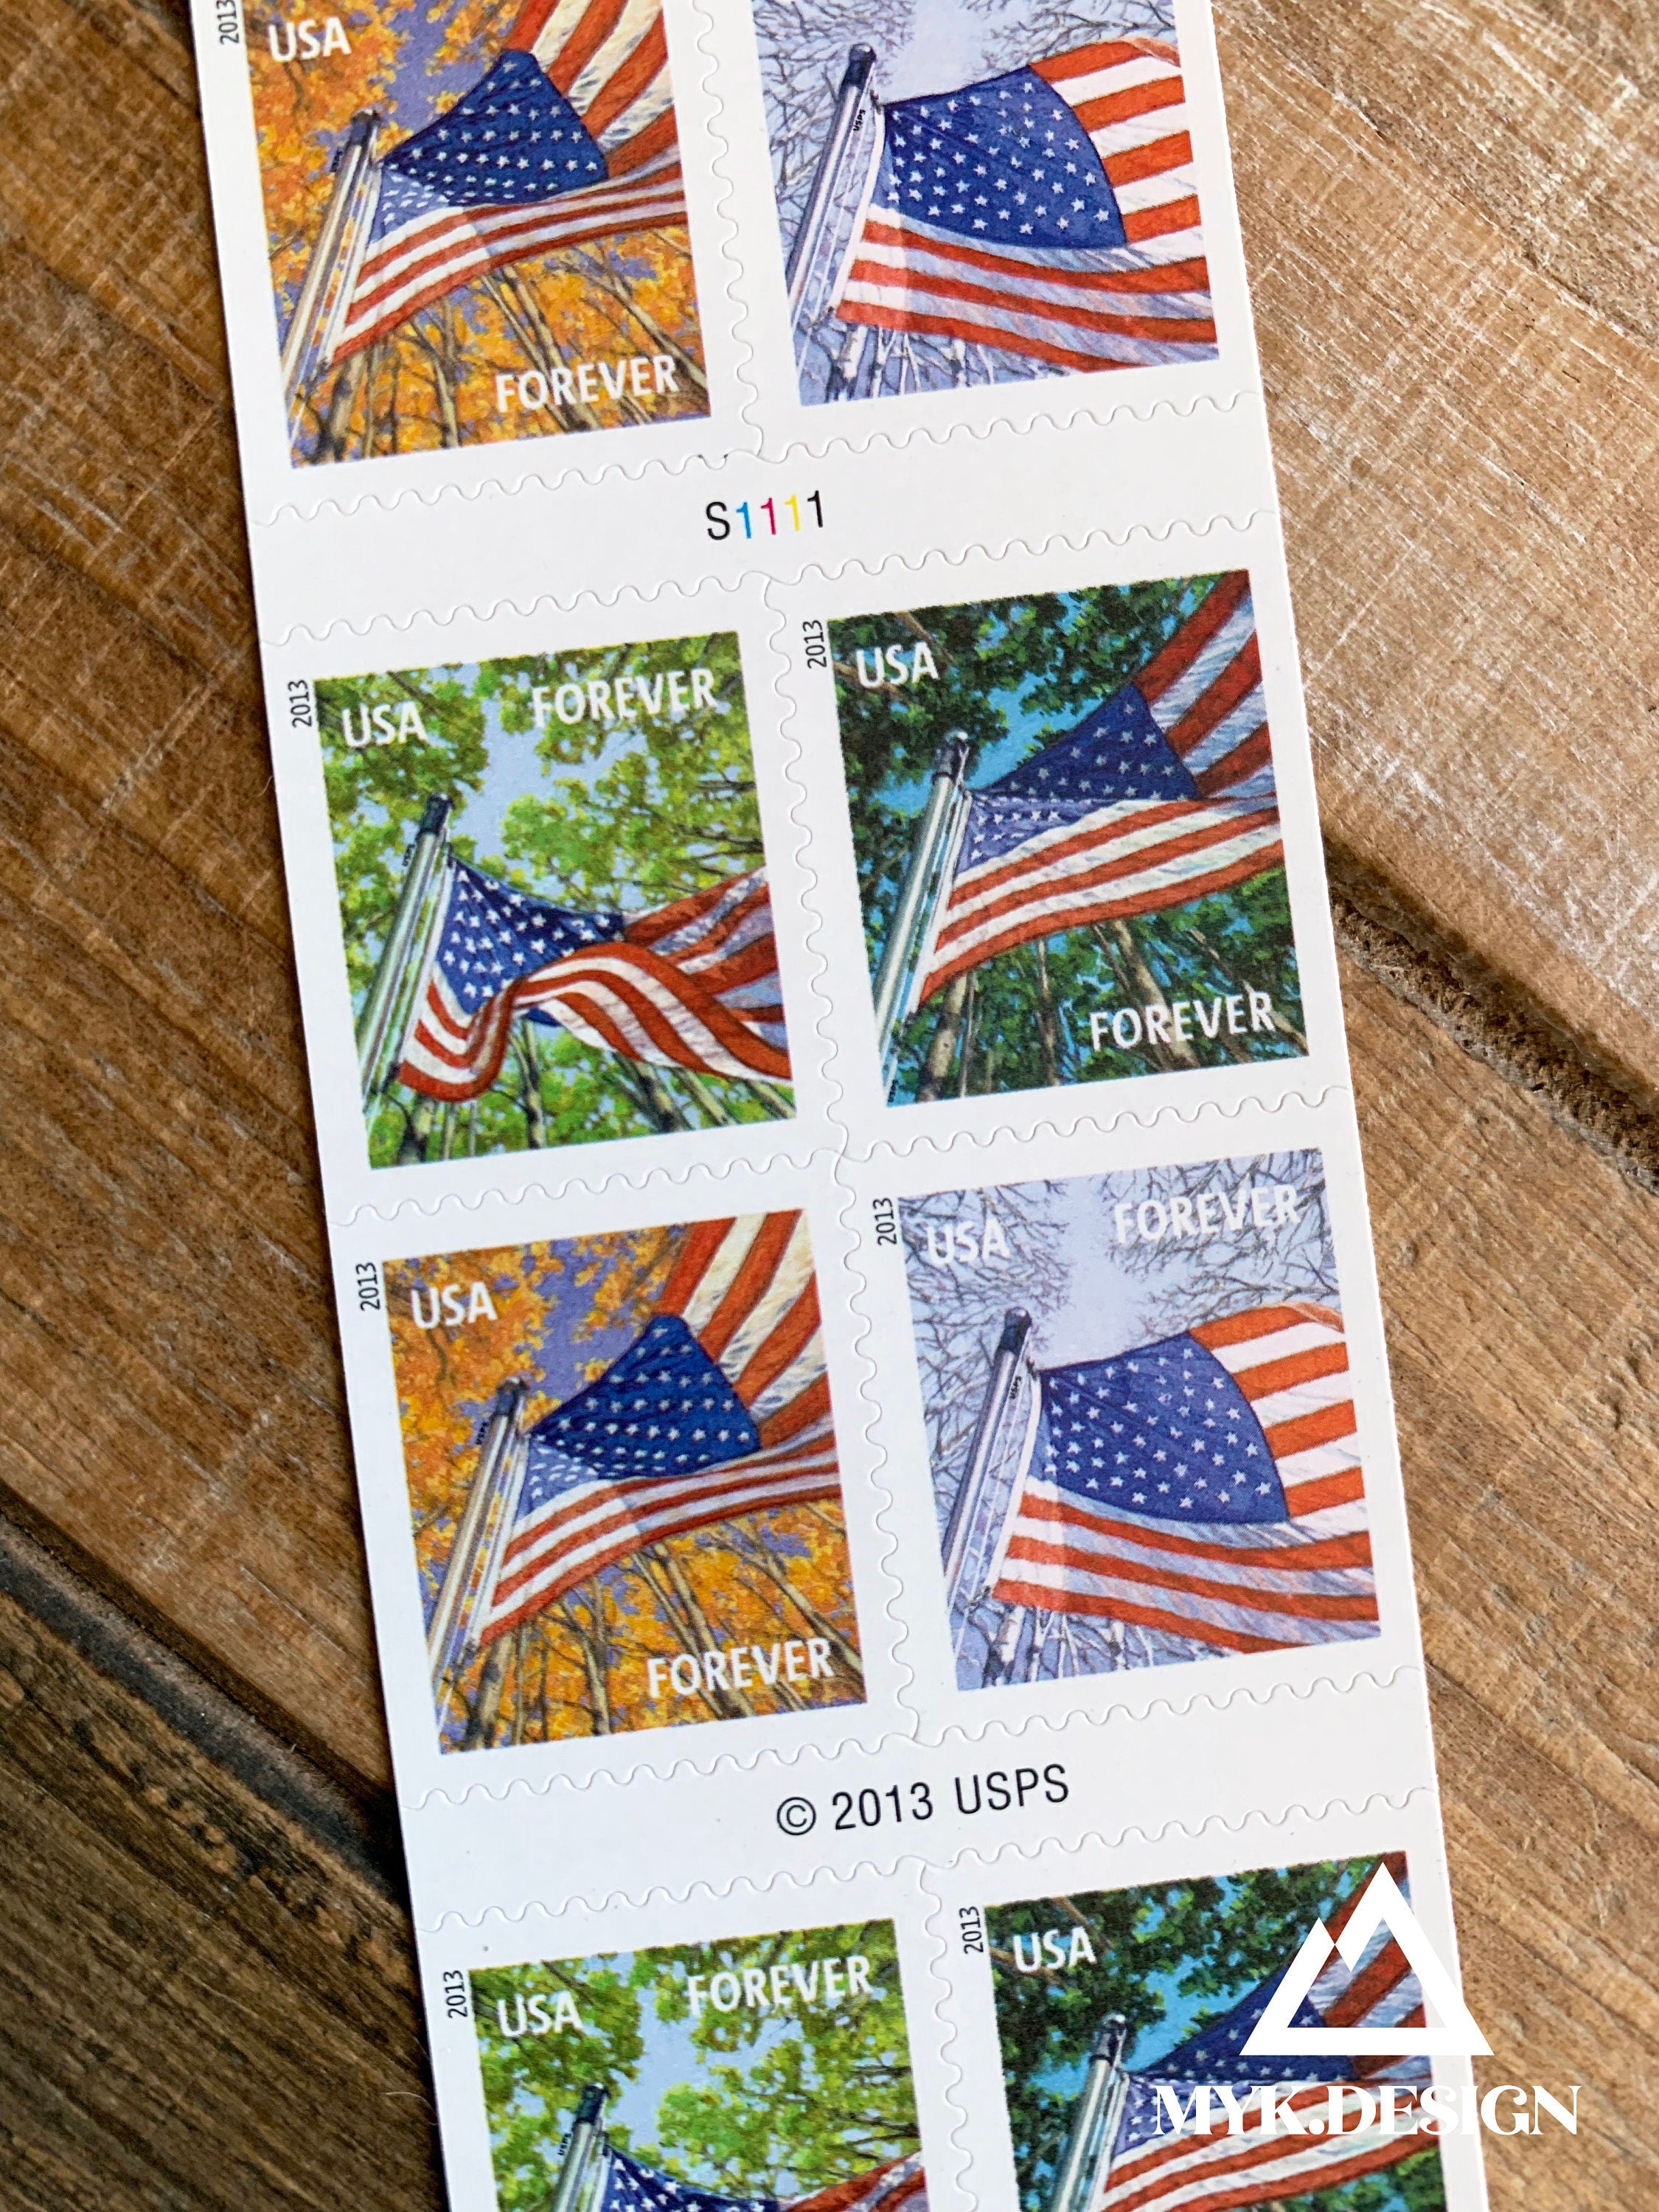 USPS Forever Postage Stamps (A Flag for All Seasons Self-Adhesive Booklet of 20)